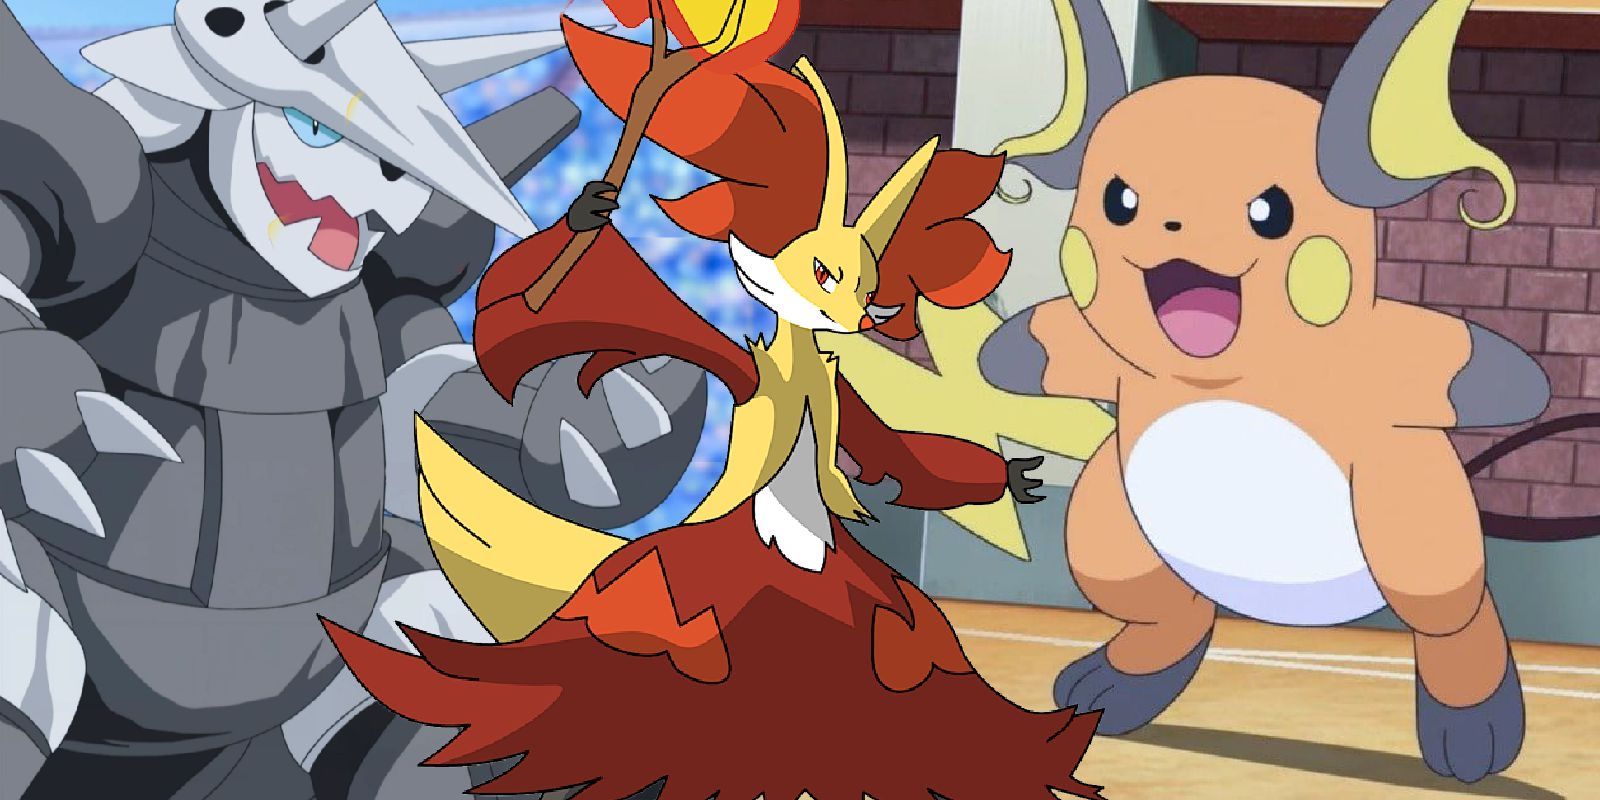 A split image of underrated Pokemon, including Aggron, Delphox and Raichu